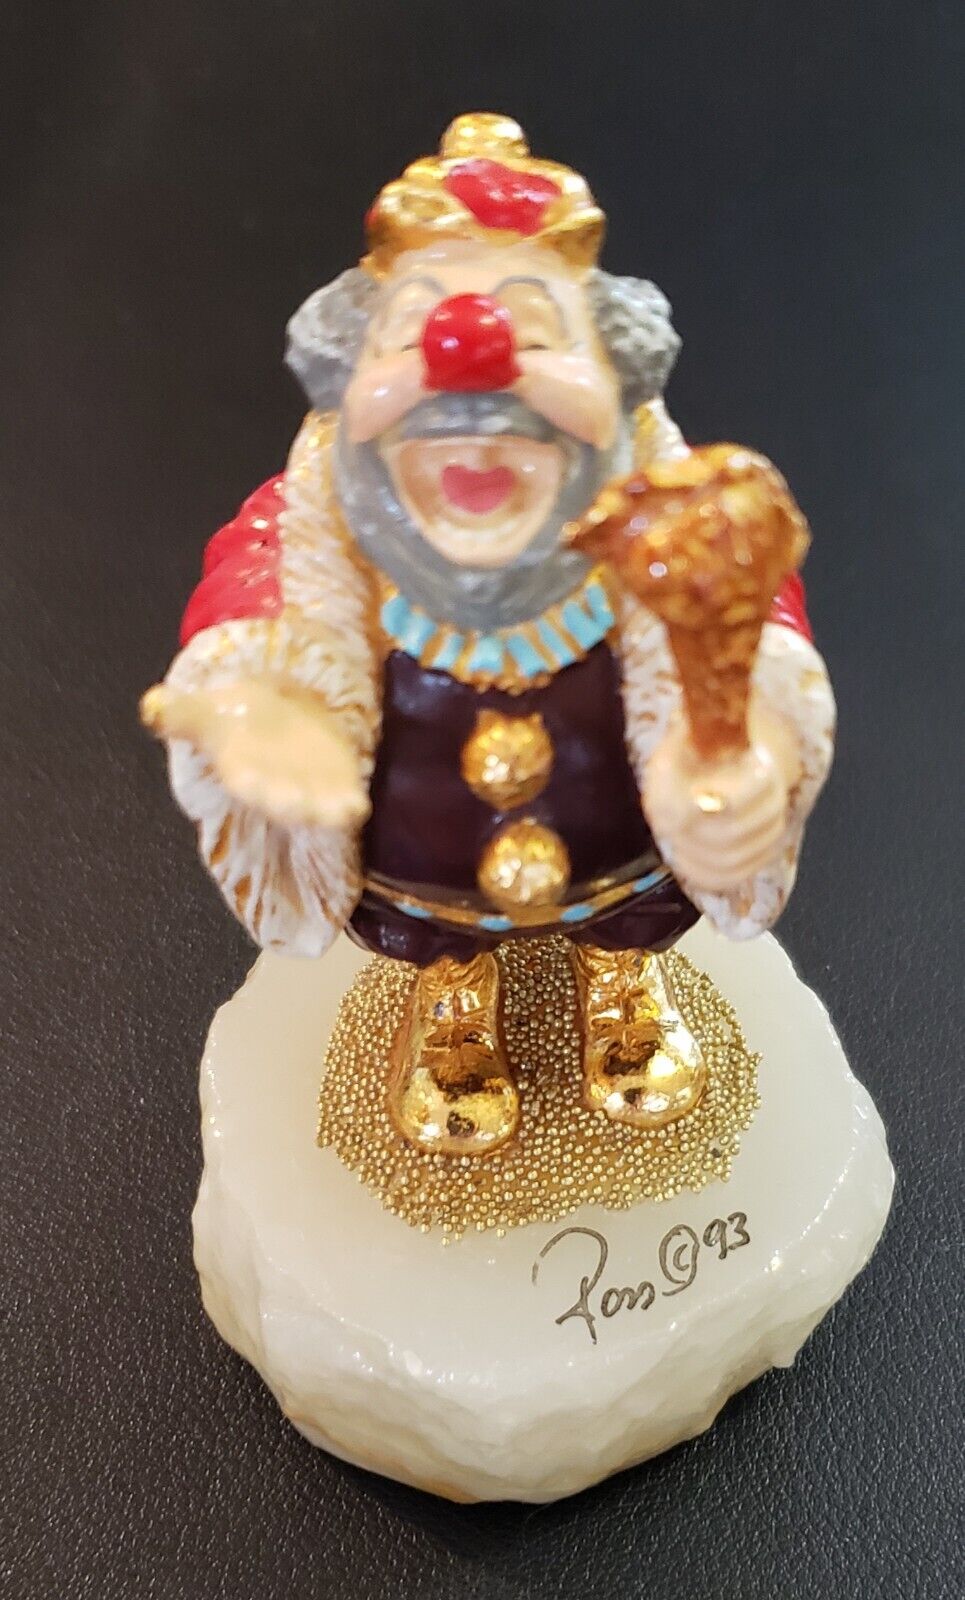 1993 RON LEE KING HENRY HOBO CLOWN 24K Gold Plated LIMITED EDITION 666/2750 MINT